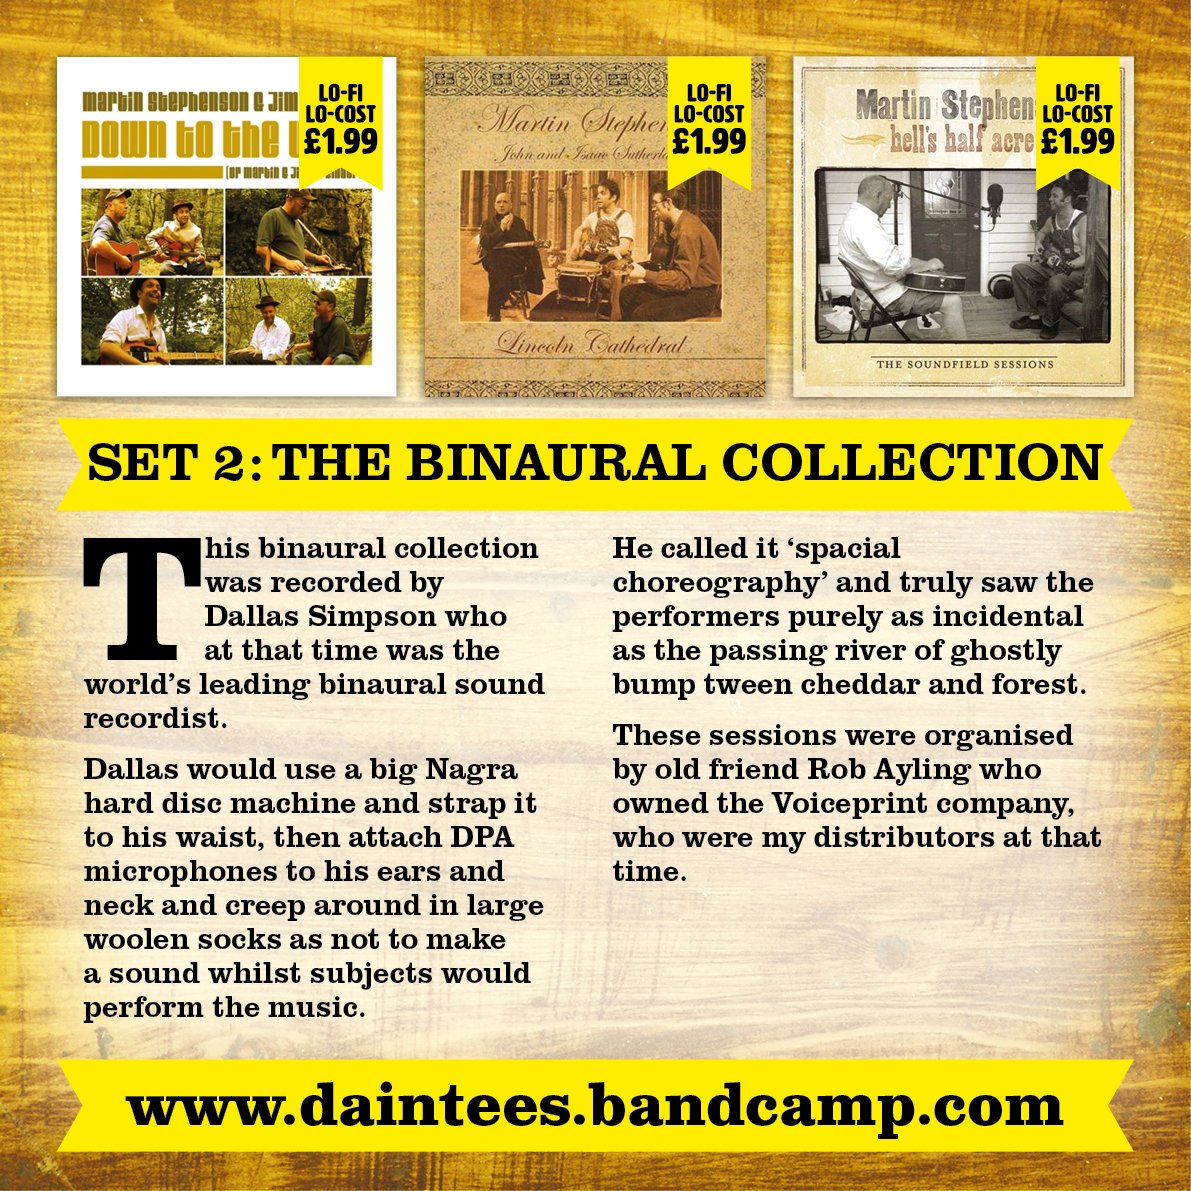 Here's a few words about "The Binaural Collection" which is the next set of three albums in the "Lo-Fi/Lo-Cost" promotion. Tomorrow I'll post about "Down To The Wood" which was recorded with  @JimHornsby in The Peak District in 2002. Mx